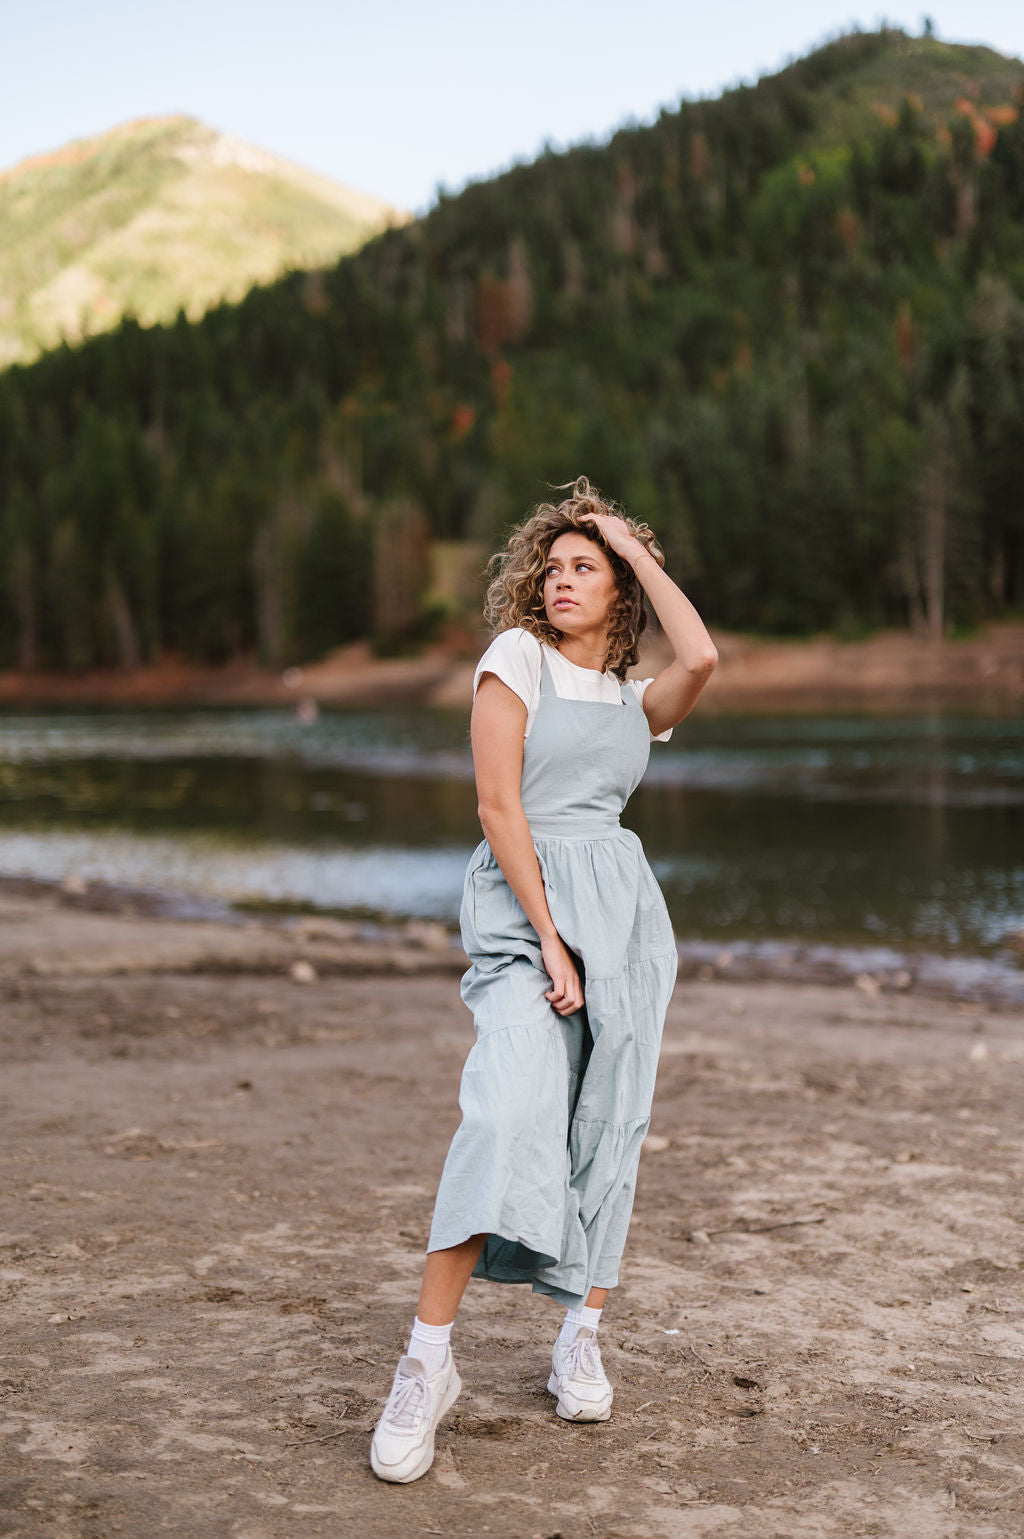 Shay Overall Dress in Dusty Blue